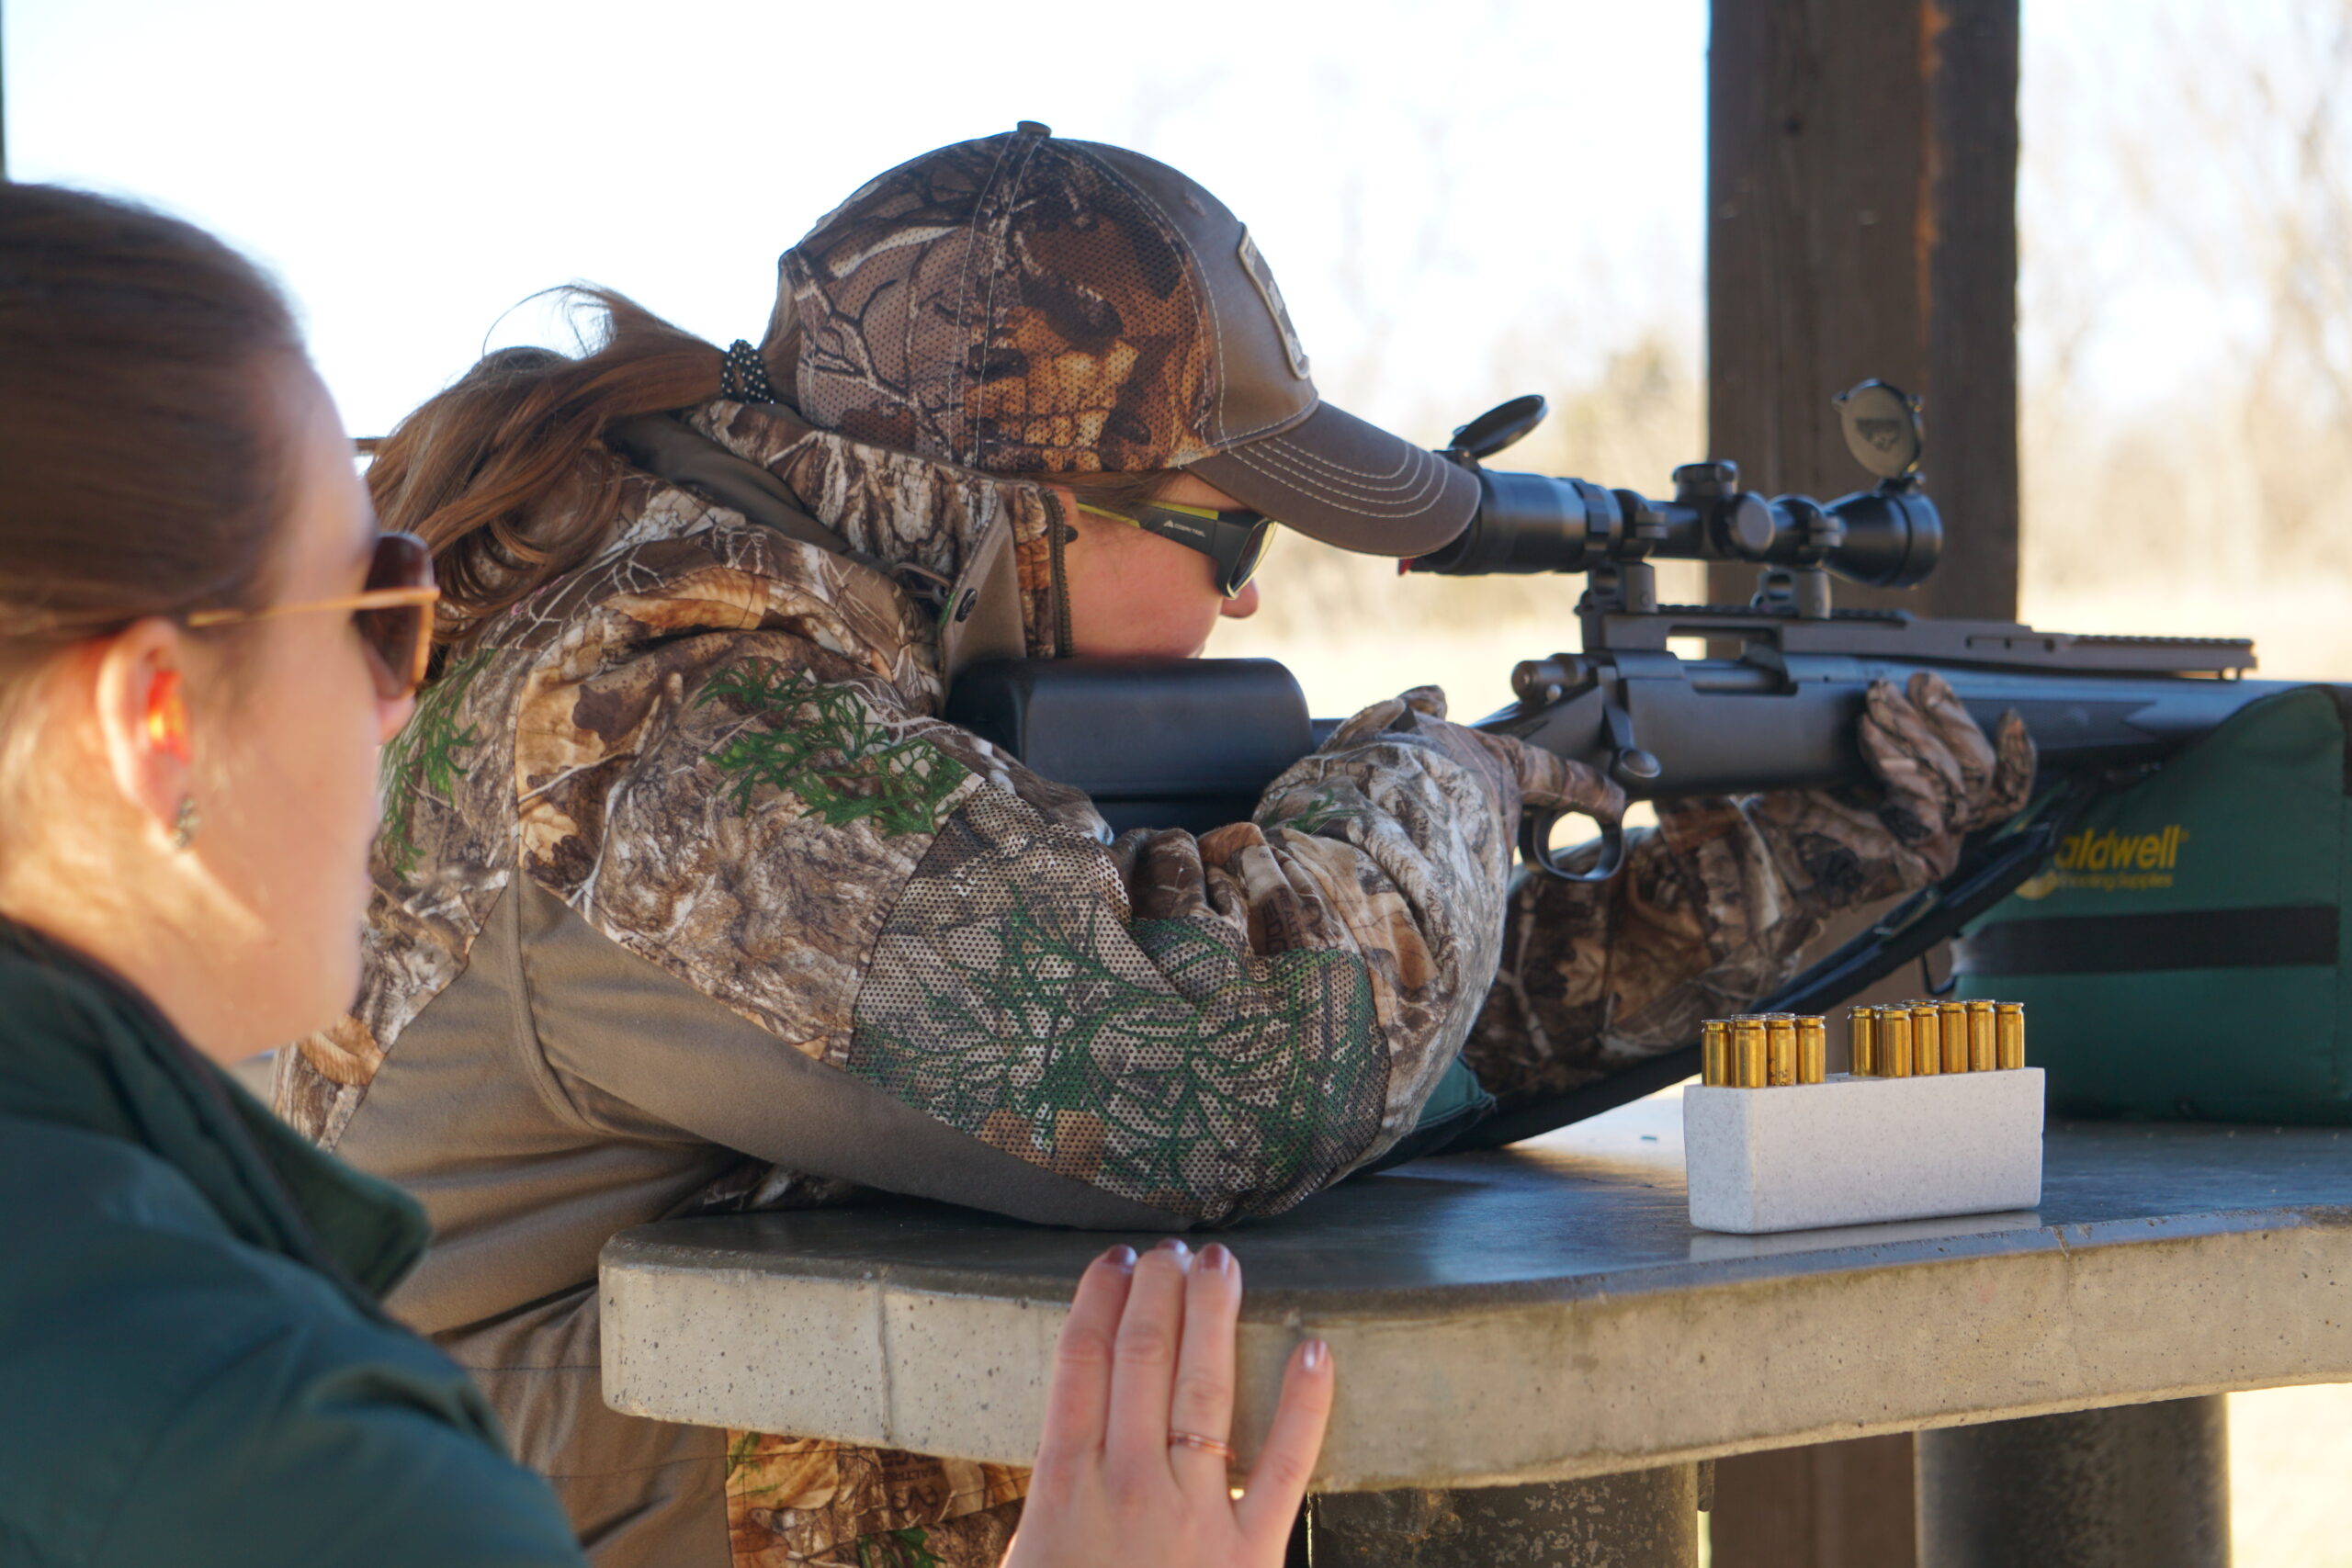 Deer hunter sights in her hunting rifle at the shooting range while an instructor watches.